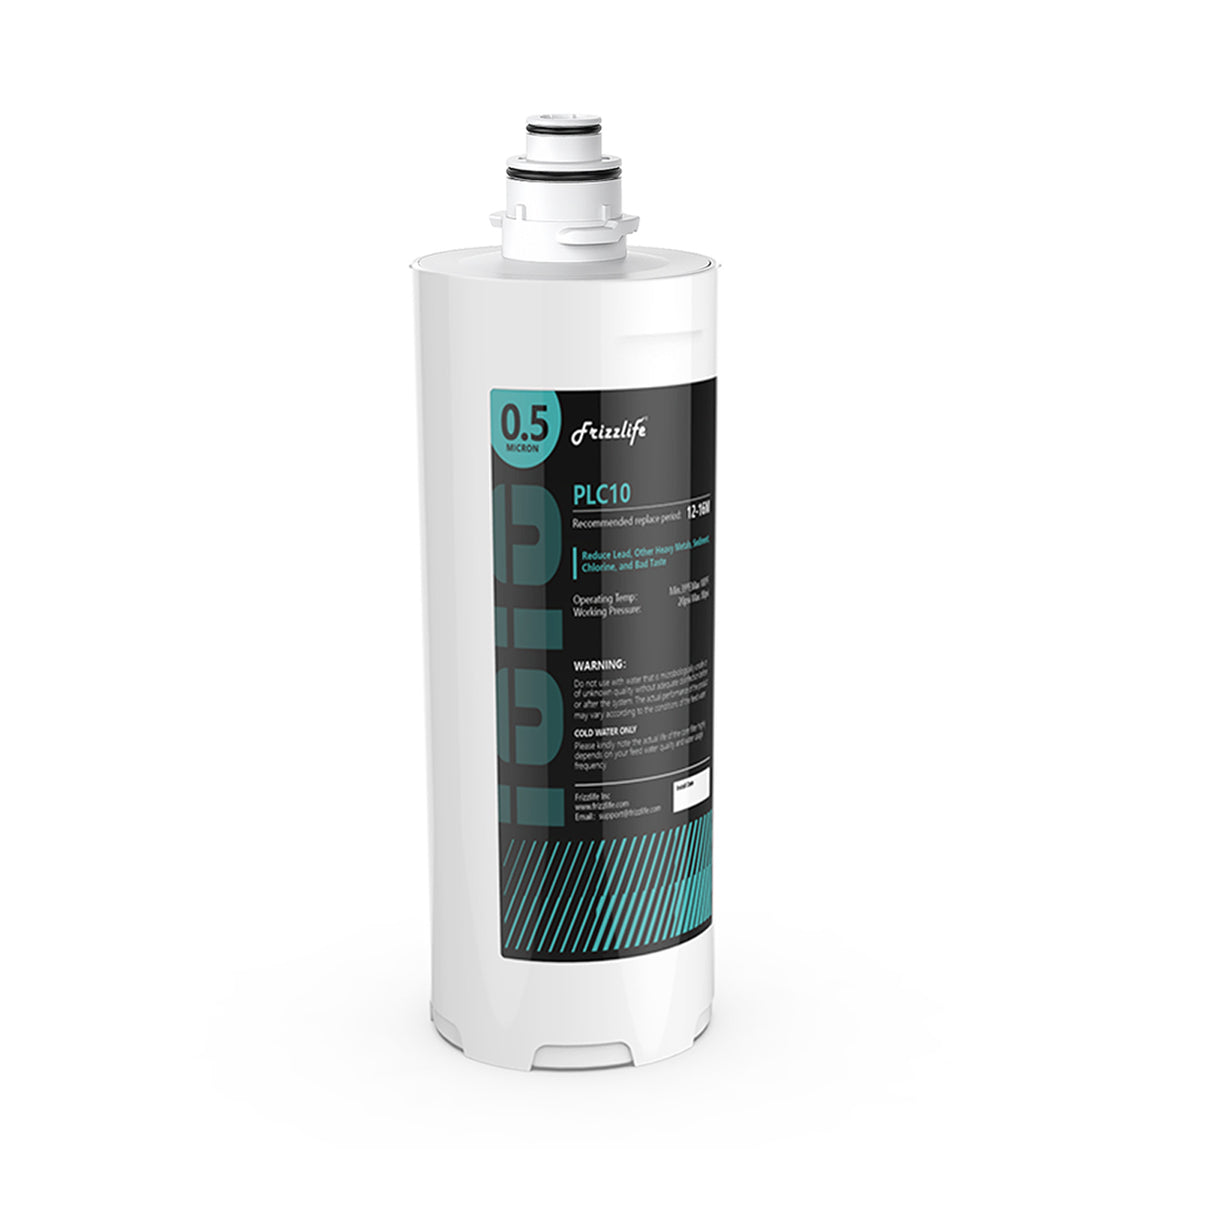 Frizzlife SW10-HF Replacement Housing Kit With PLC10 Filter Cartridge Inside - For SW10 and SW10F Under Sink Water Filter Systems